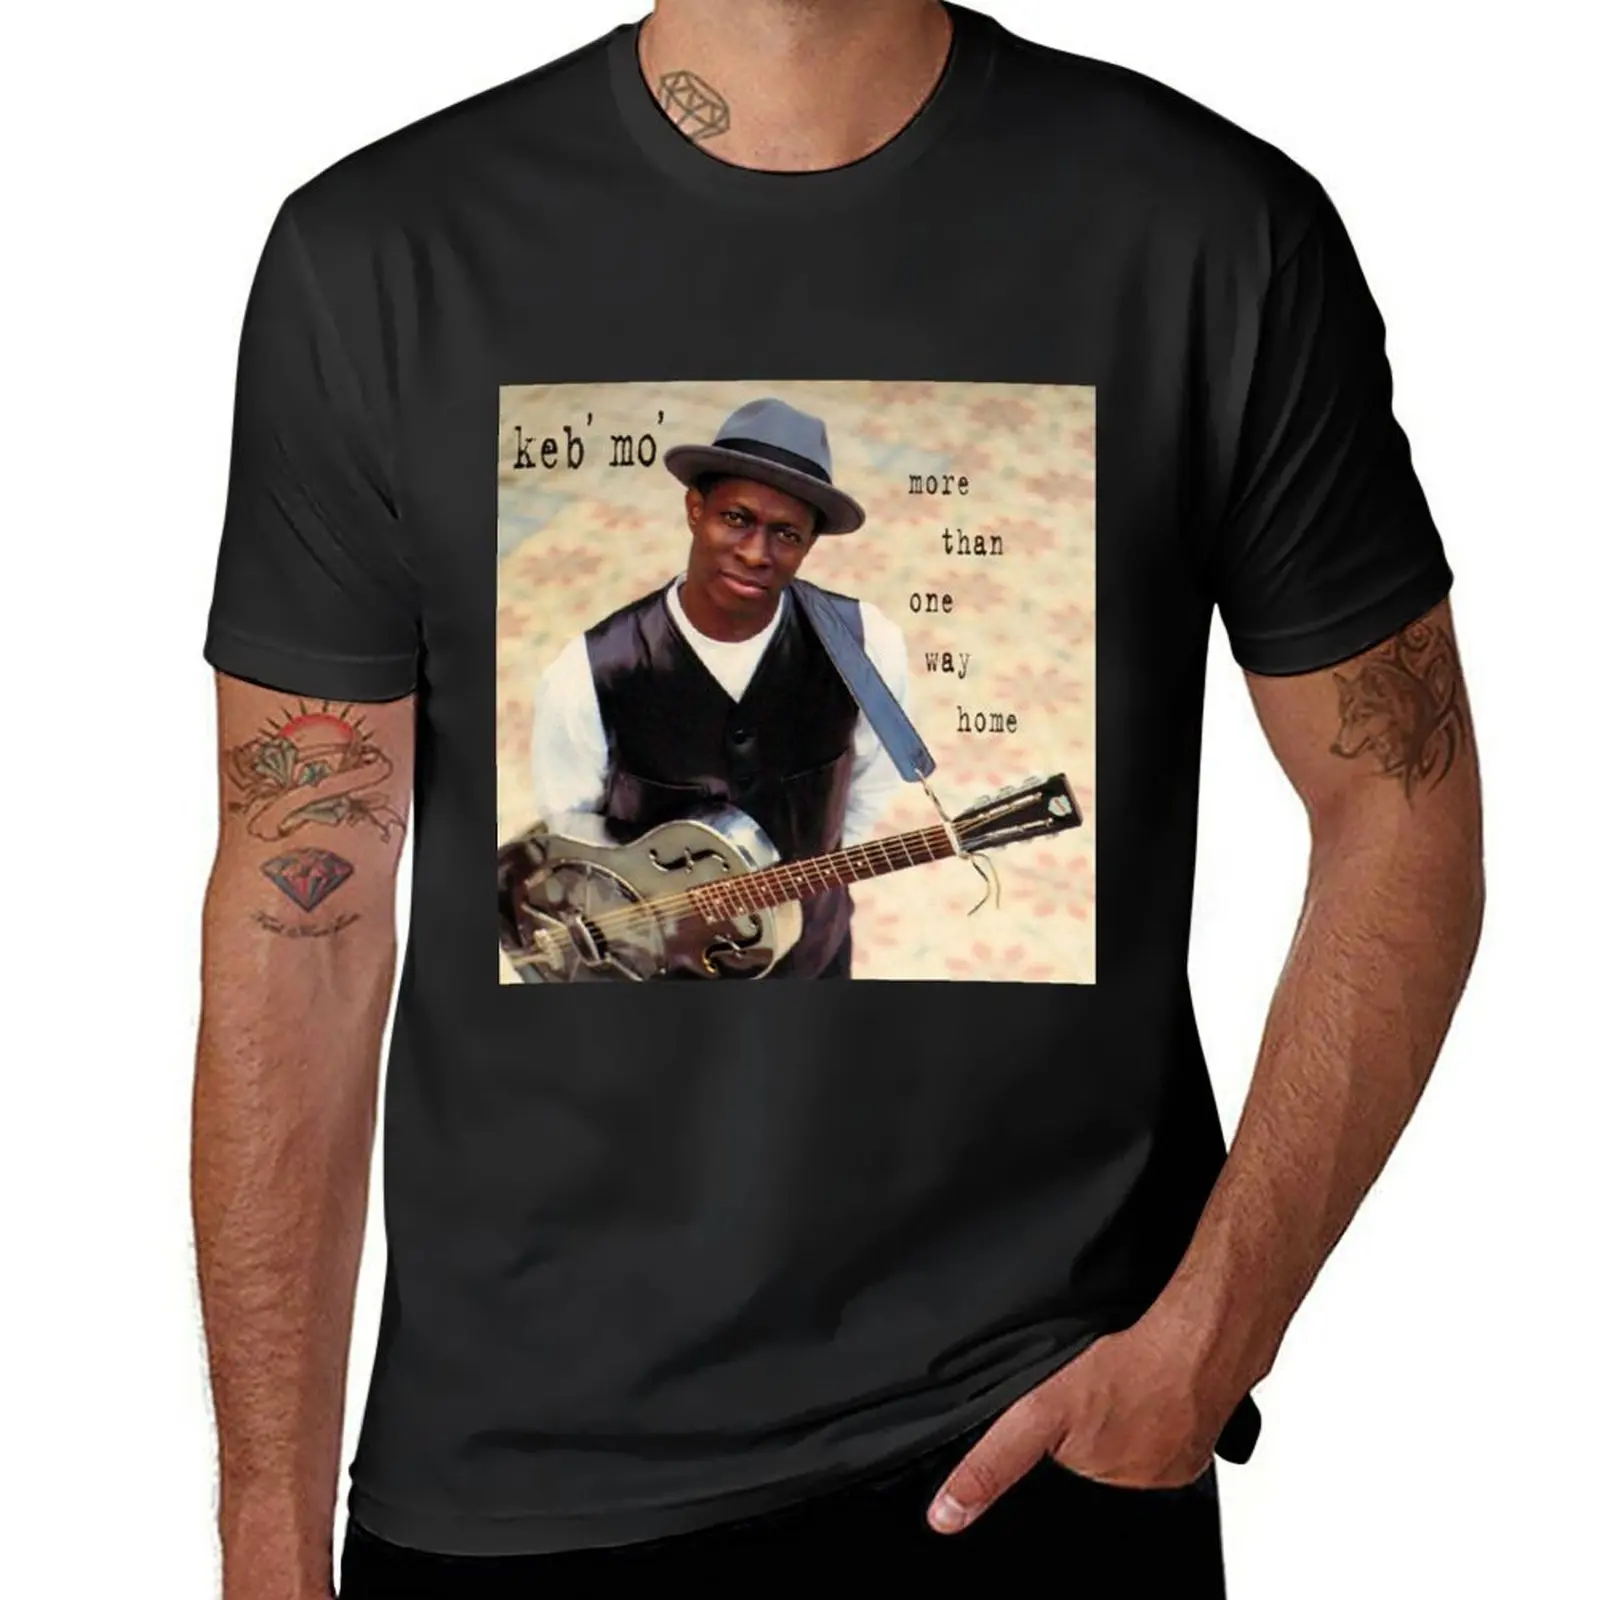 

New Keb Mo more than one way home T-Shirt graphic t shirt cute clothes sports fan t-shirts graphic t shirts Men's t-shirt